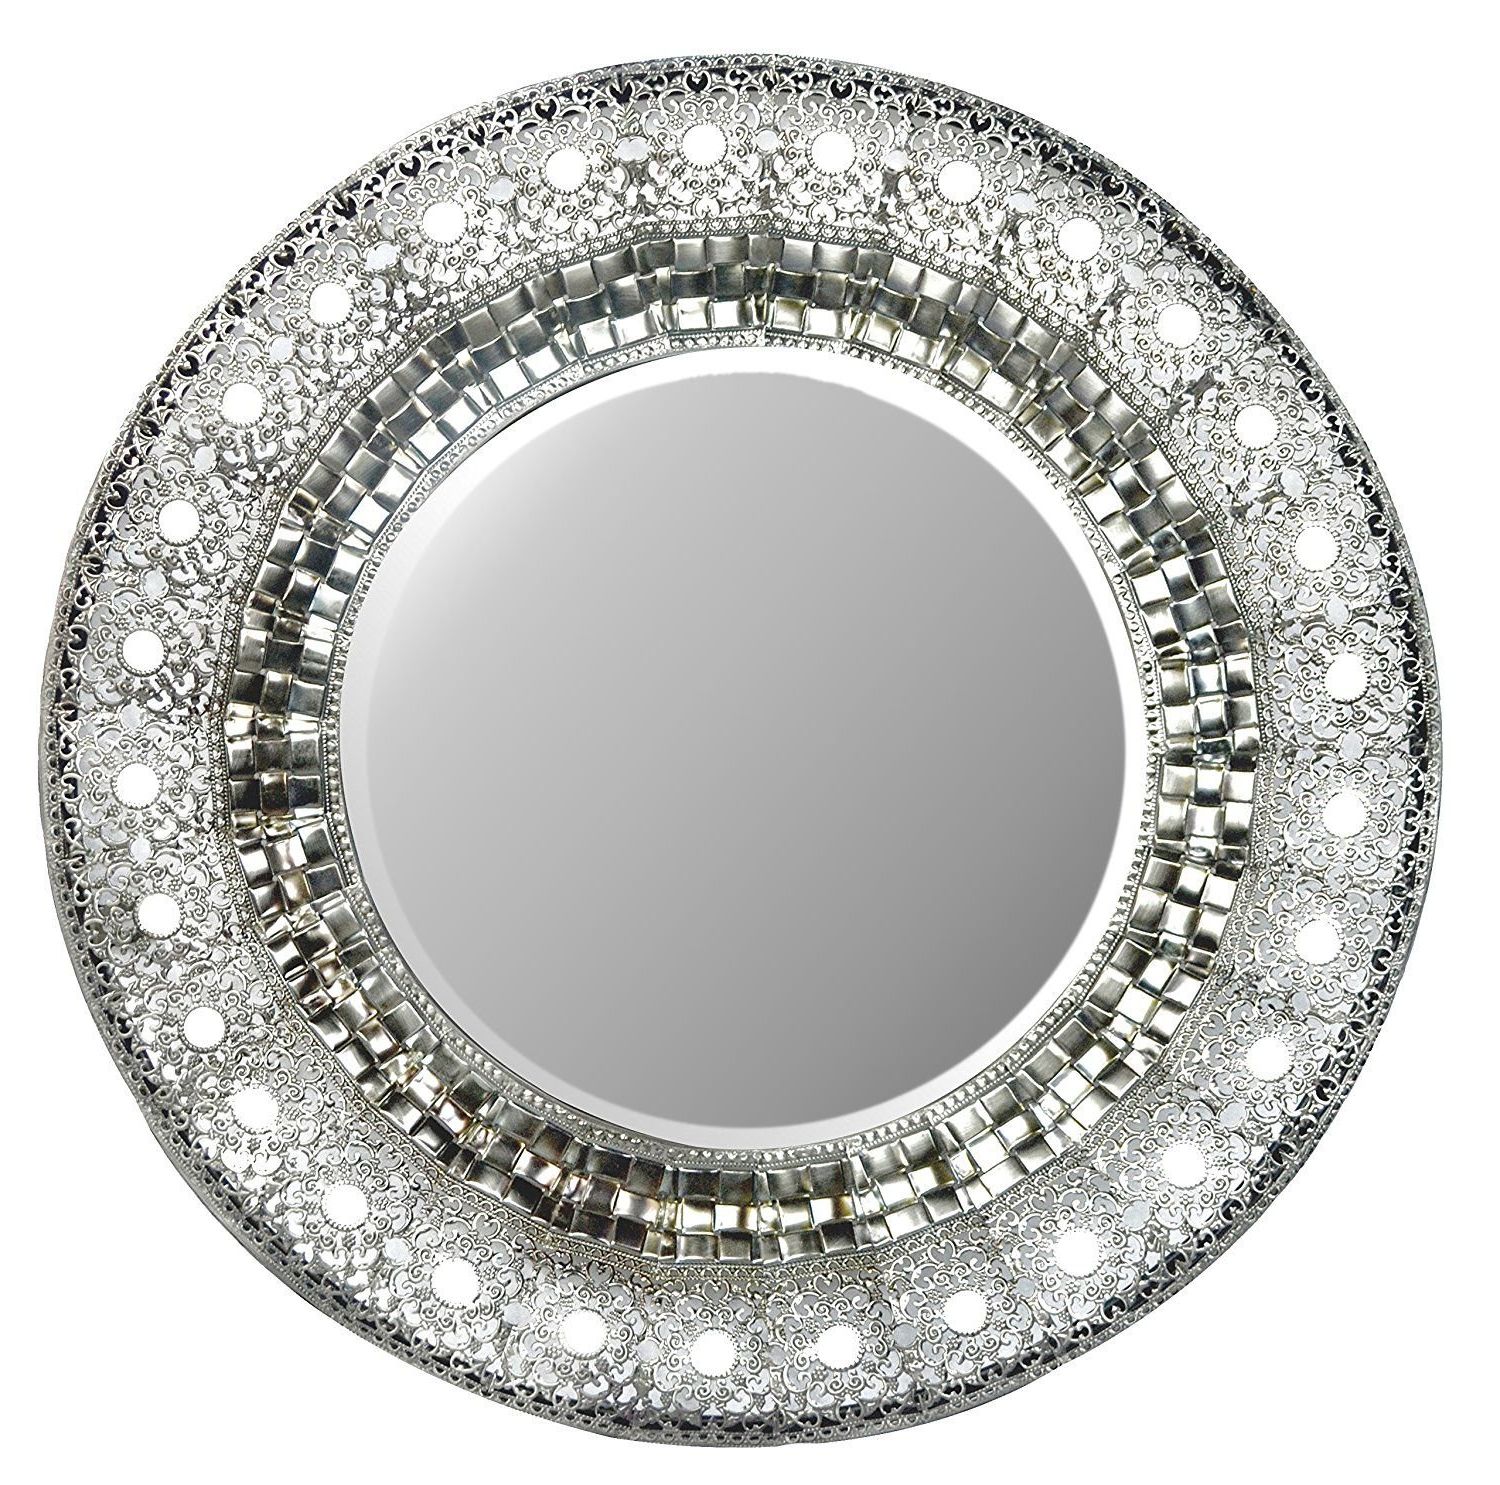 Trendy Decorative Round Wall Mirrors Throughout Lulu Decor, 19" Oriental Round Silver Metal Beveled Wall Mirror, Decorative  Mirror For Home & Office (oriental 19") (View 10 of 20)